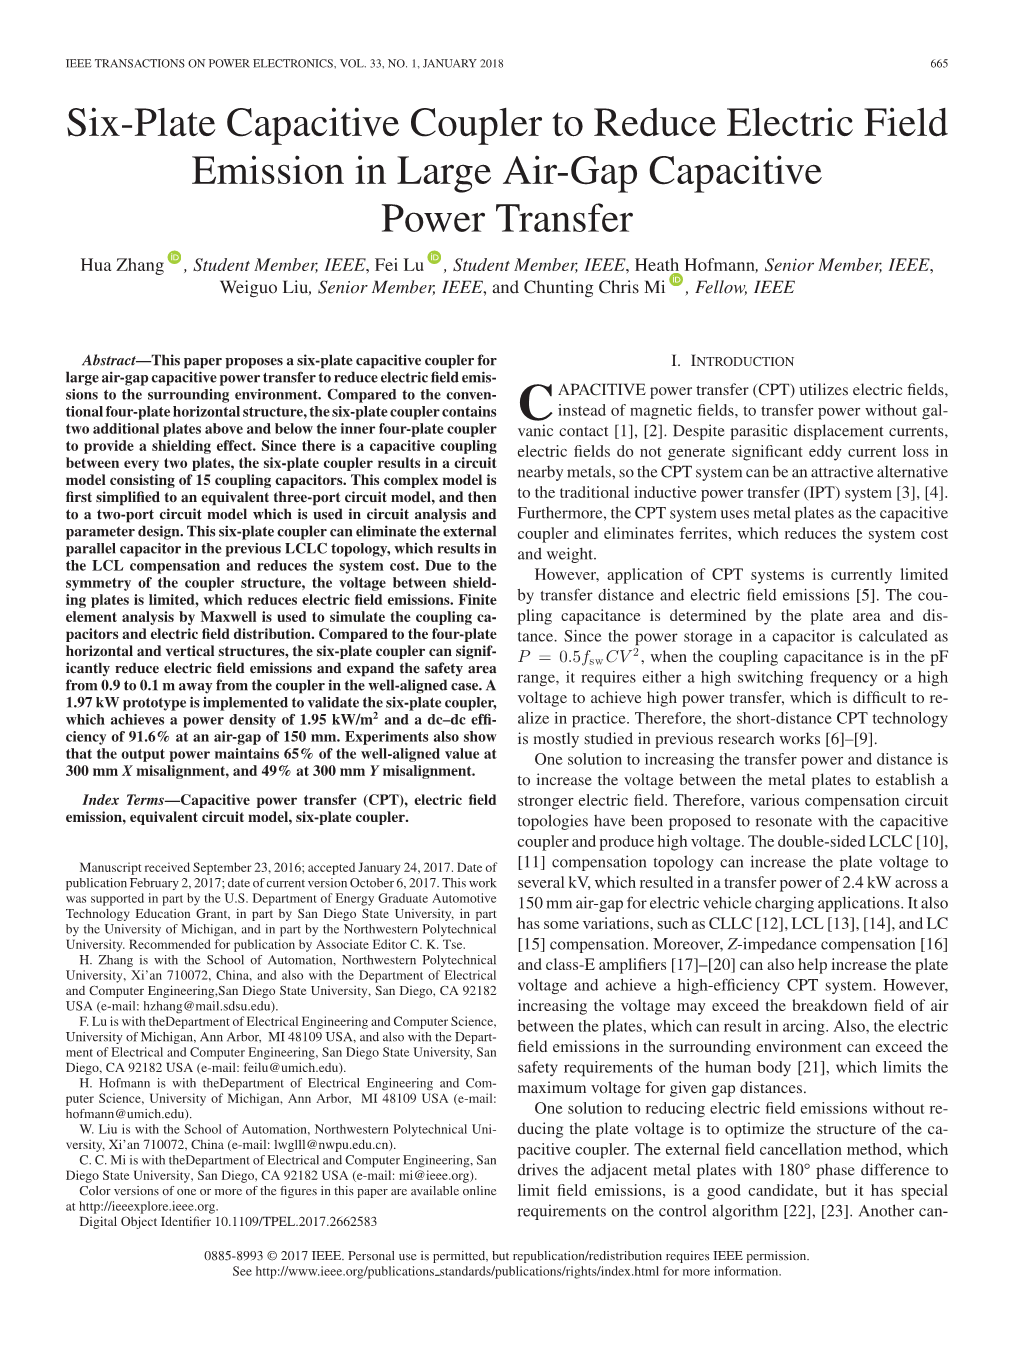 Six-Plate Capacitive Coupler to Reduce Electric Field Emission In